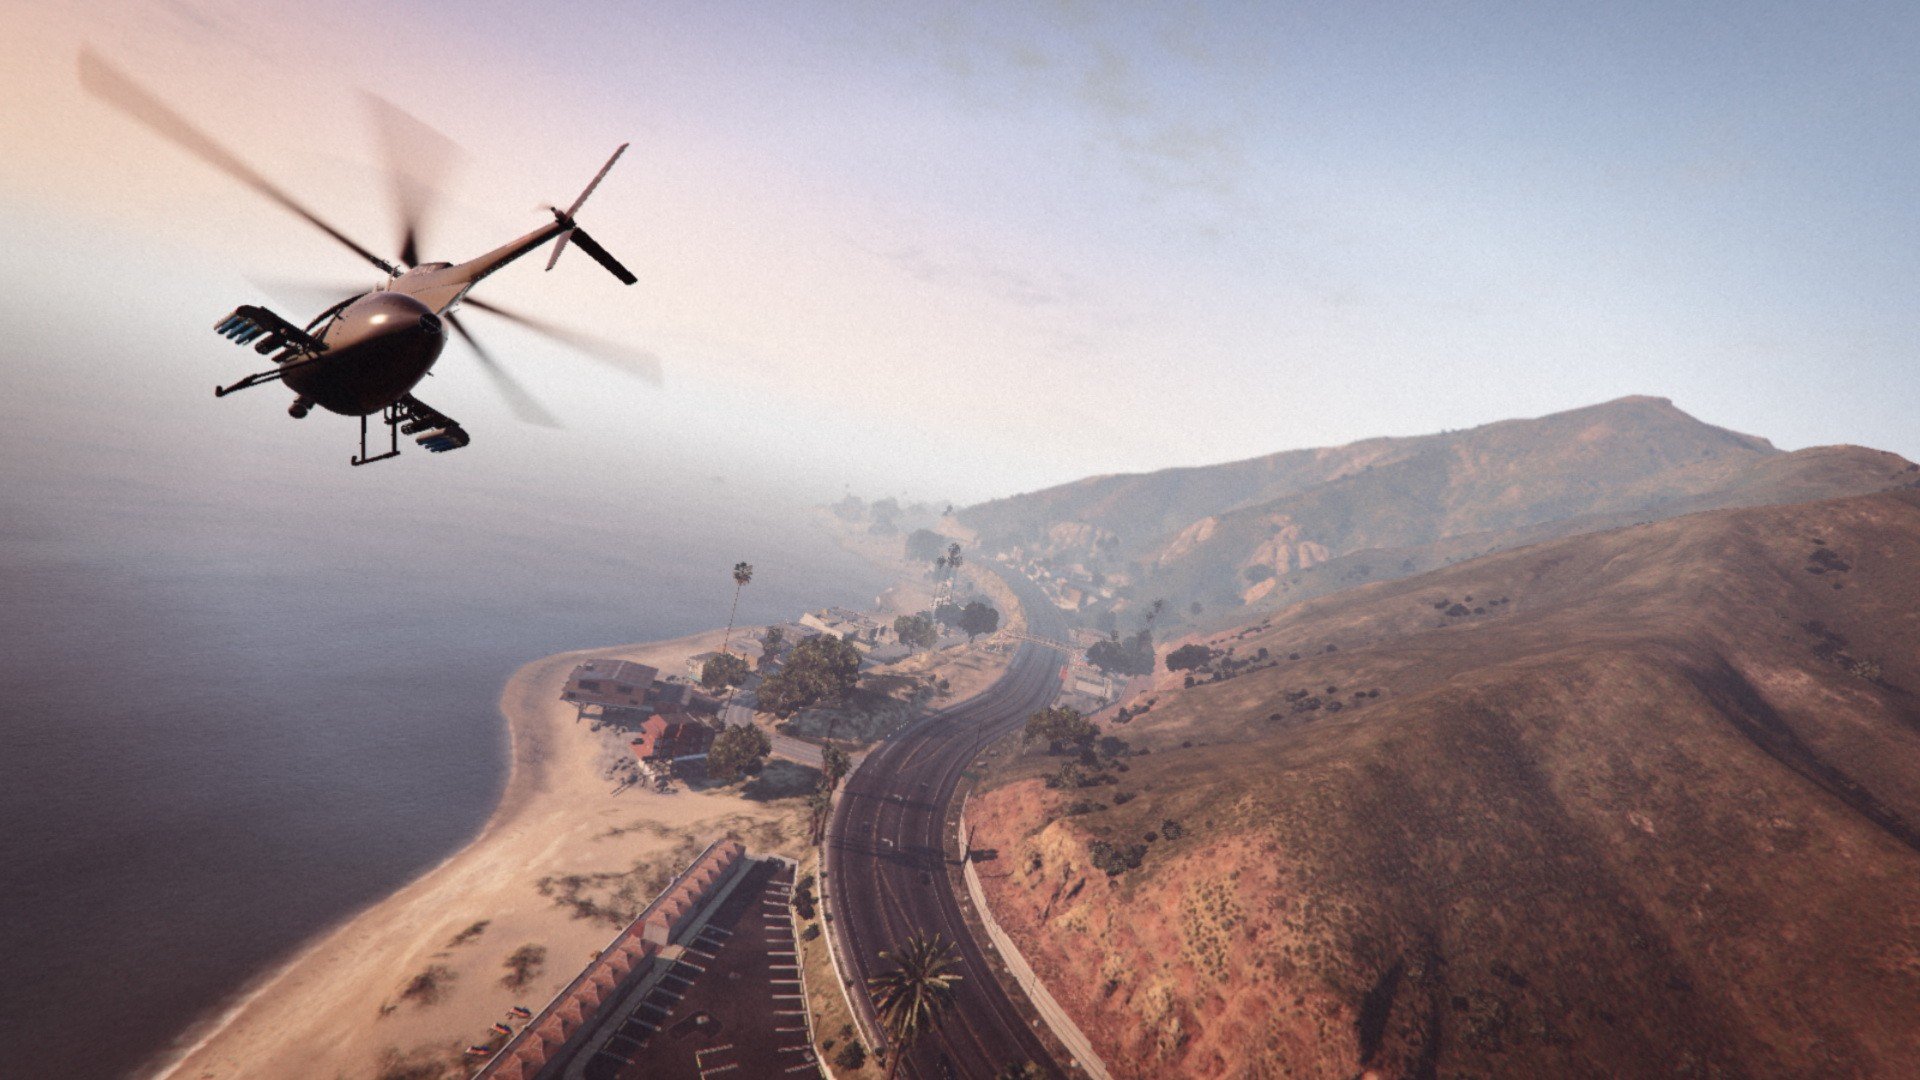 Grand Theft Auto V, Grand Theft Auto Online, Helicopters, Highway, Rockstar Games, Map, Mountains Wallpaper